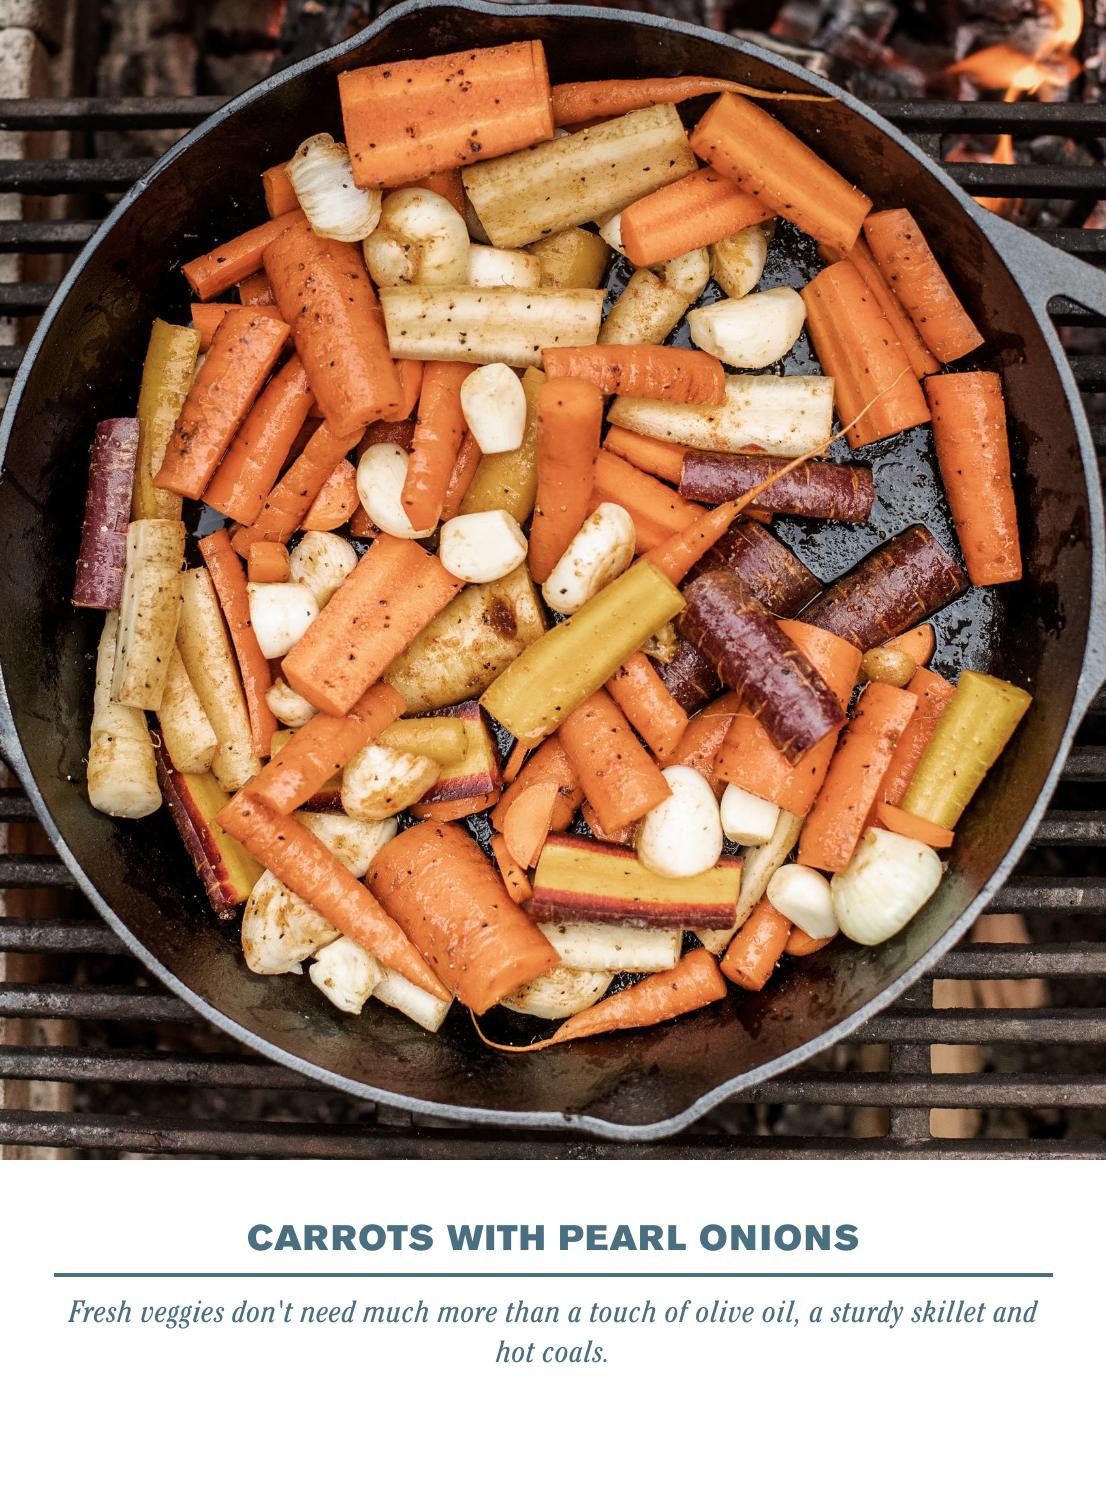    CARROTS WITH PEARL ONIONS    Fresh veggies don’t need much more than a touch of olive oil, a sturdy skillet and hot coals. 